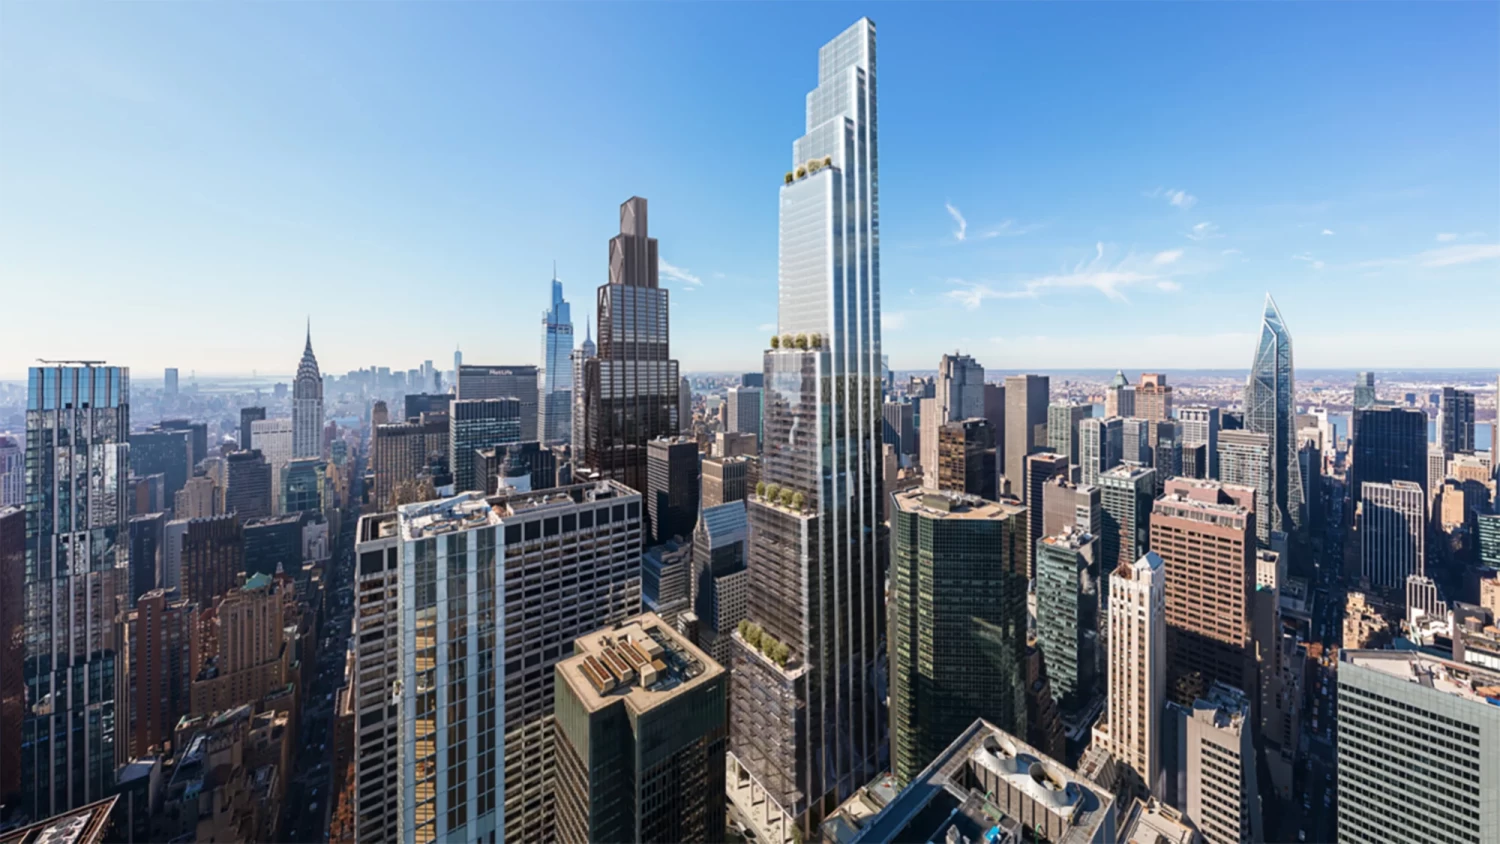 The skyscraper will be 62 stories high. Foster + Partners